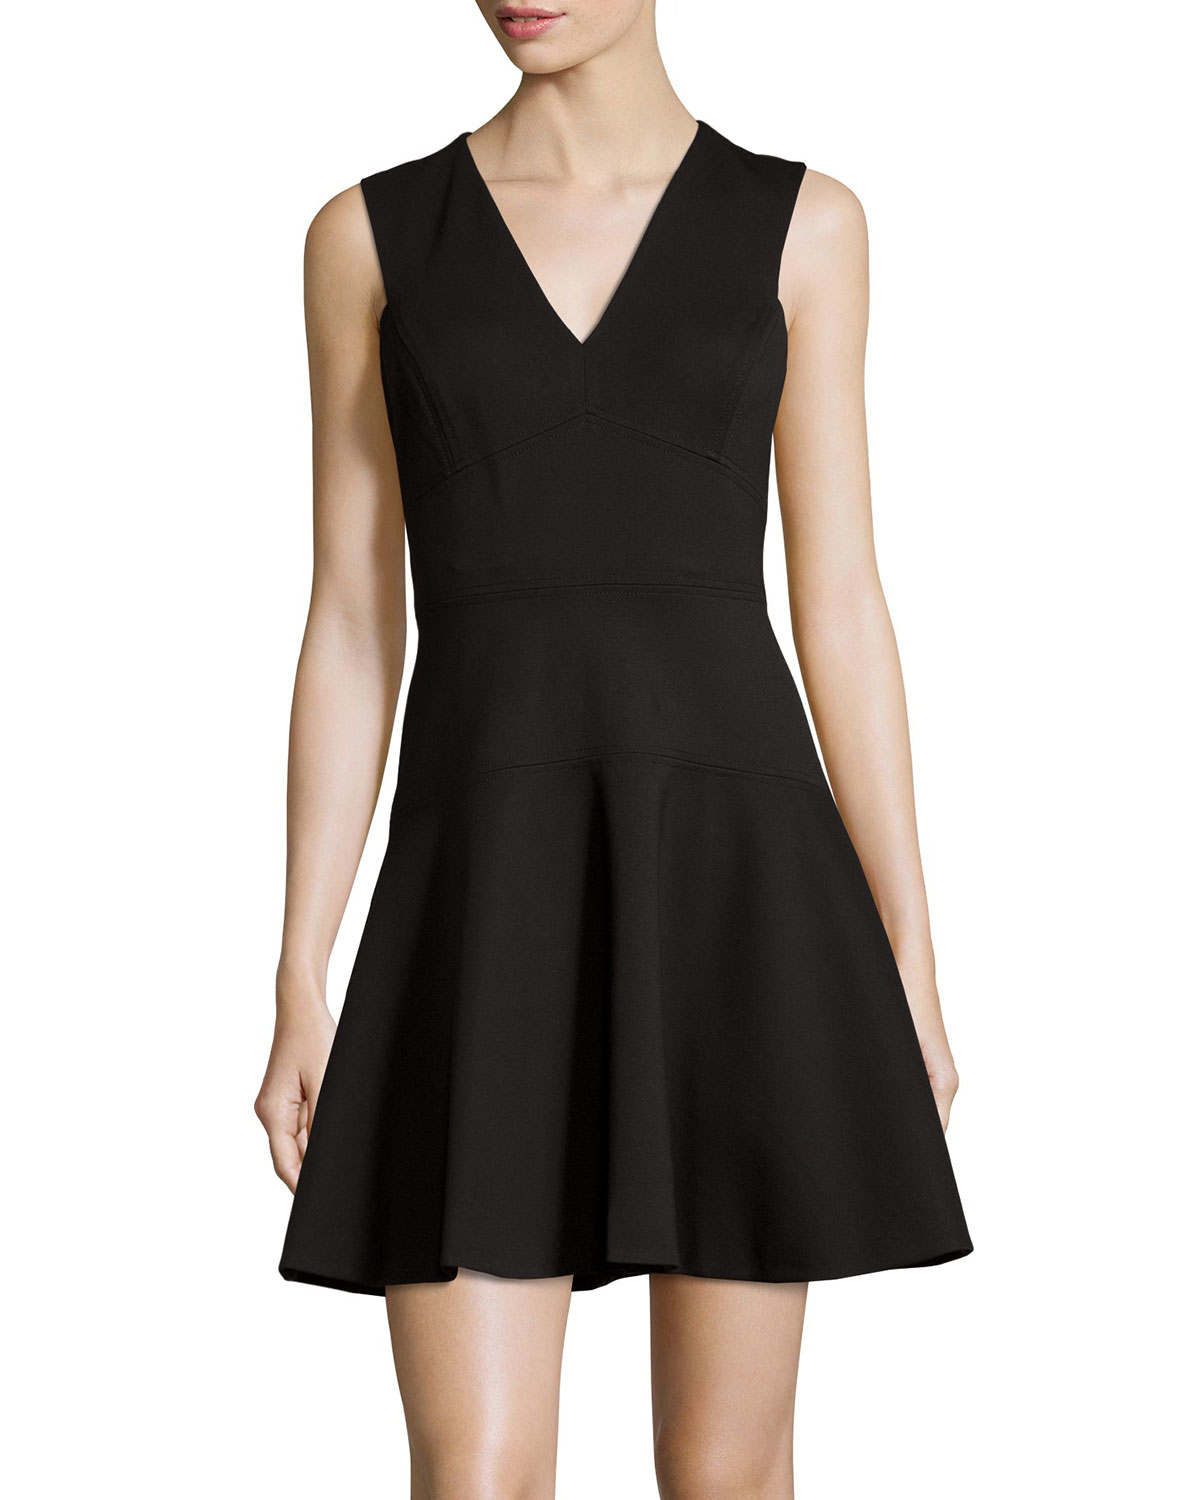 Lyst - Rebecca Taylor V-neck Sleeveless Fit-and-flare Dress in Black